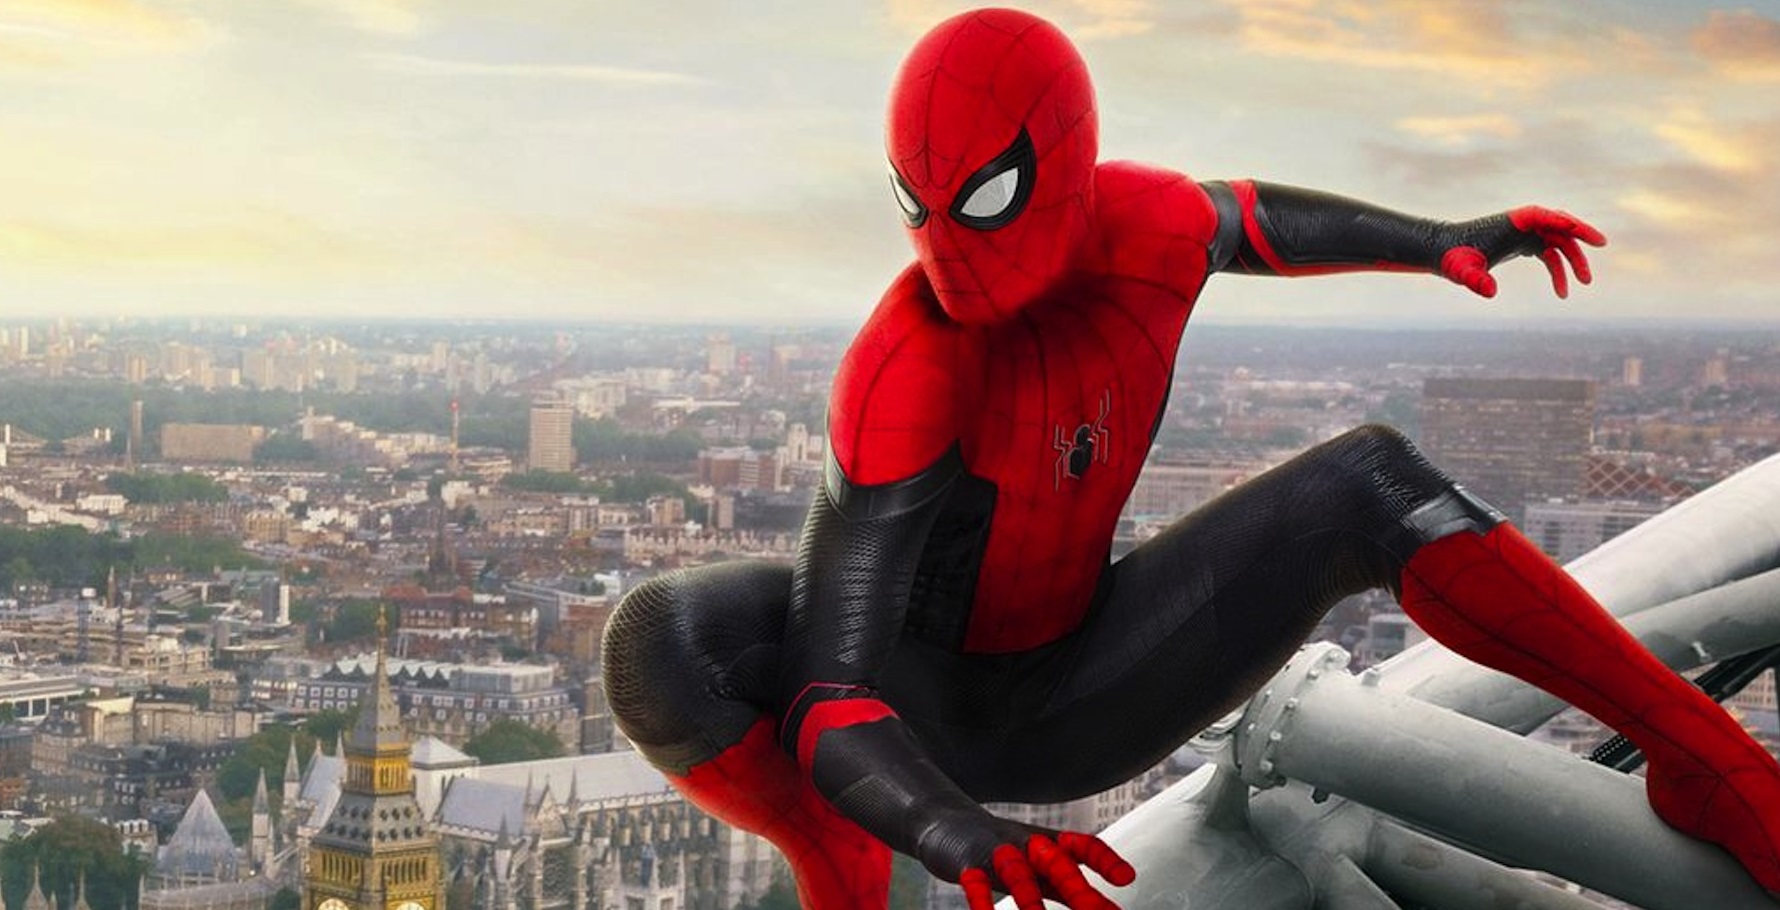 Spider Man Far From Home 3